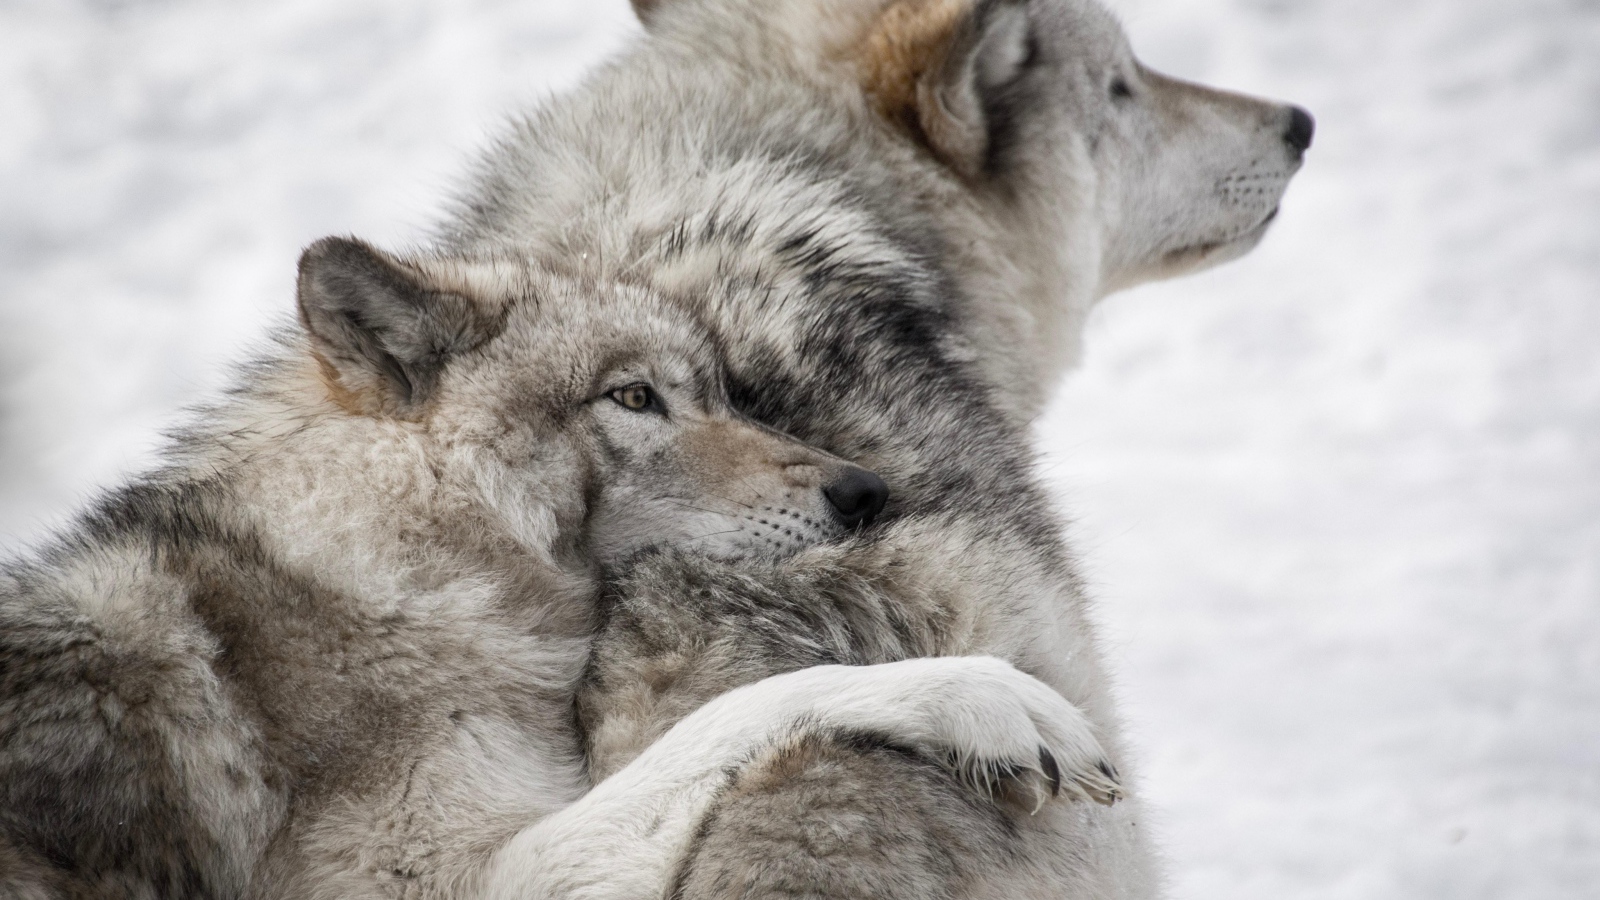 Pair of gray wolves in the snow in winter